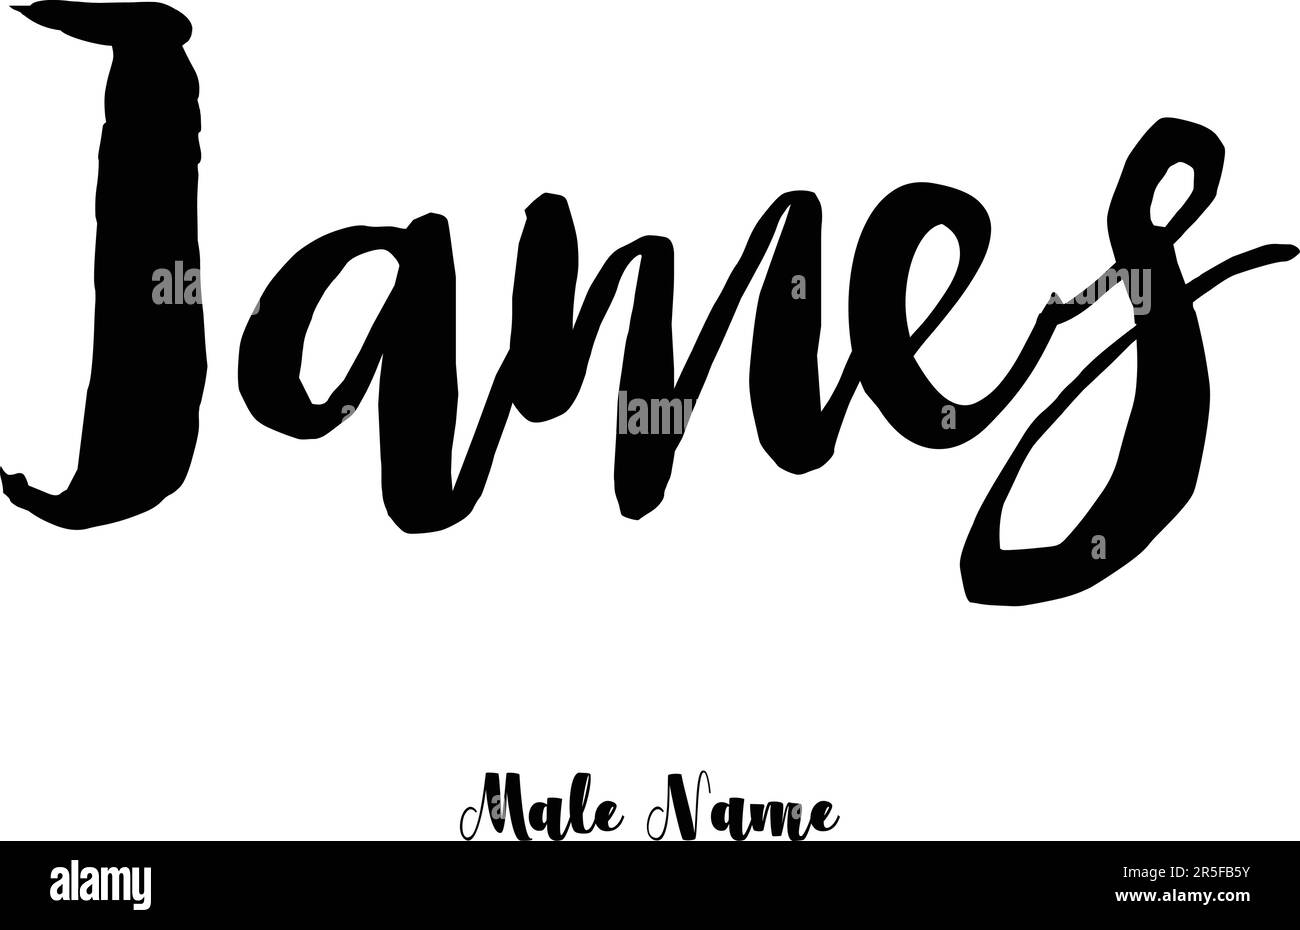 Male Name Stylish Bold Grunge Typography Text Lettering Vector Design Stock Vector